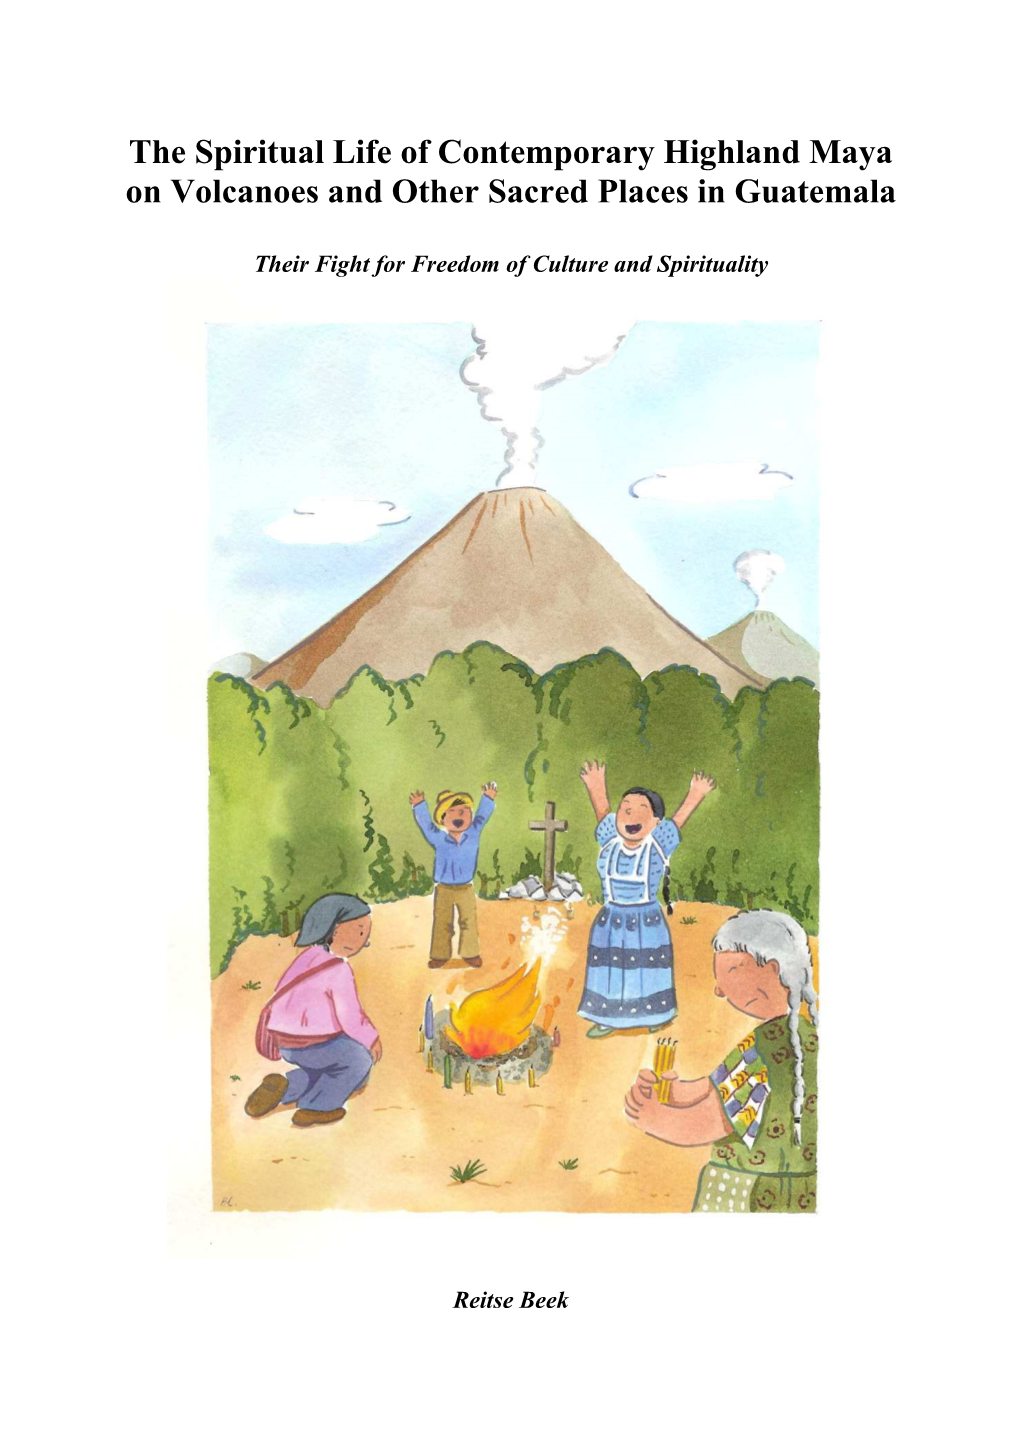 The Spiritual Life of Contemporary Highland Maya on Volcanoes and Other Sacred Places in Guatemala